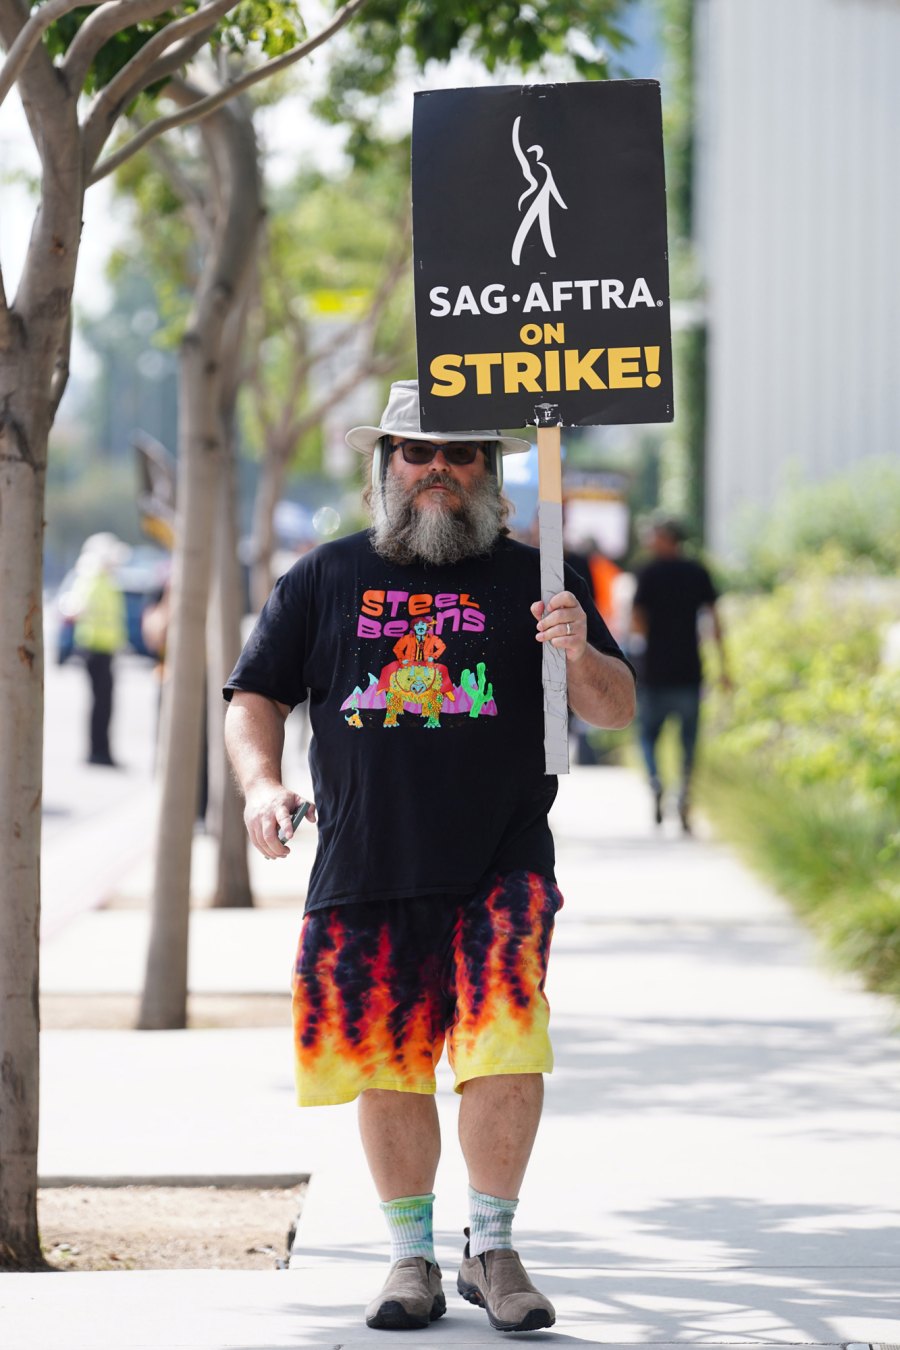 Celebrities Whove Joined the SAG-AFTRA Strike